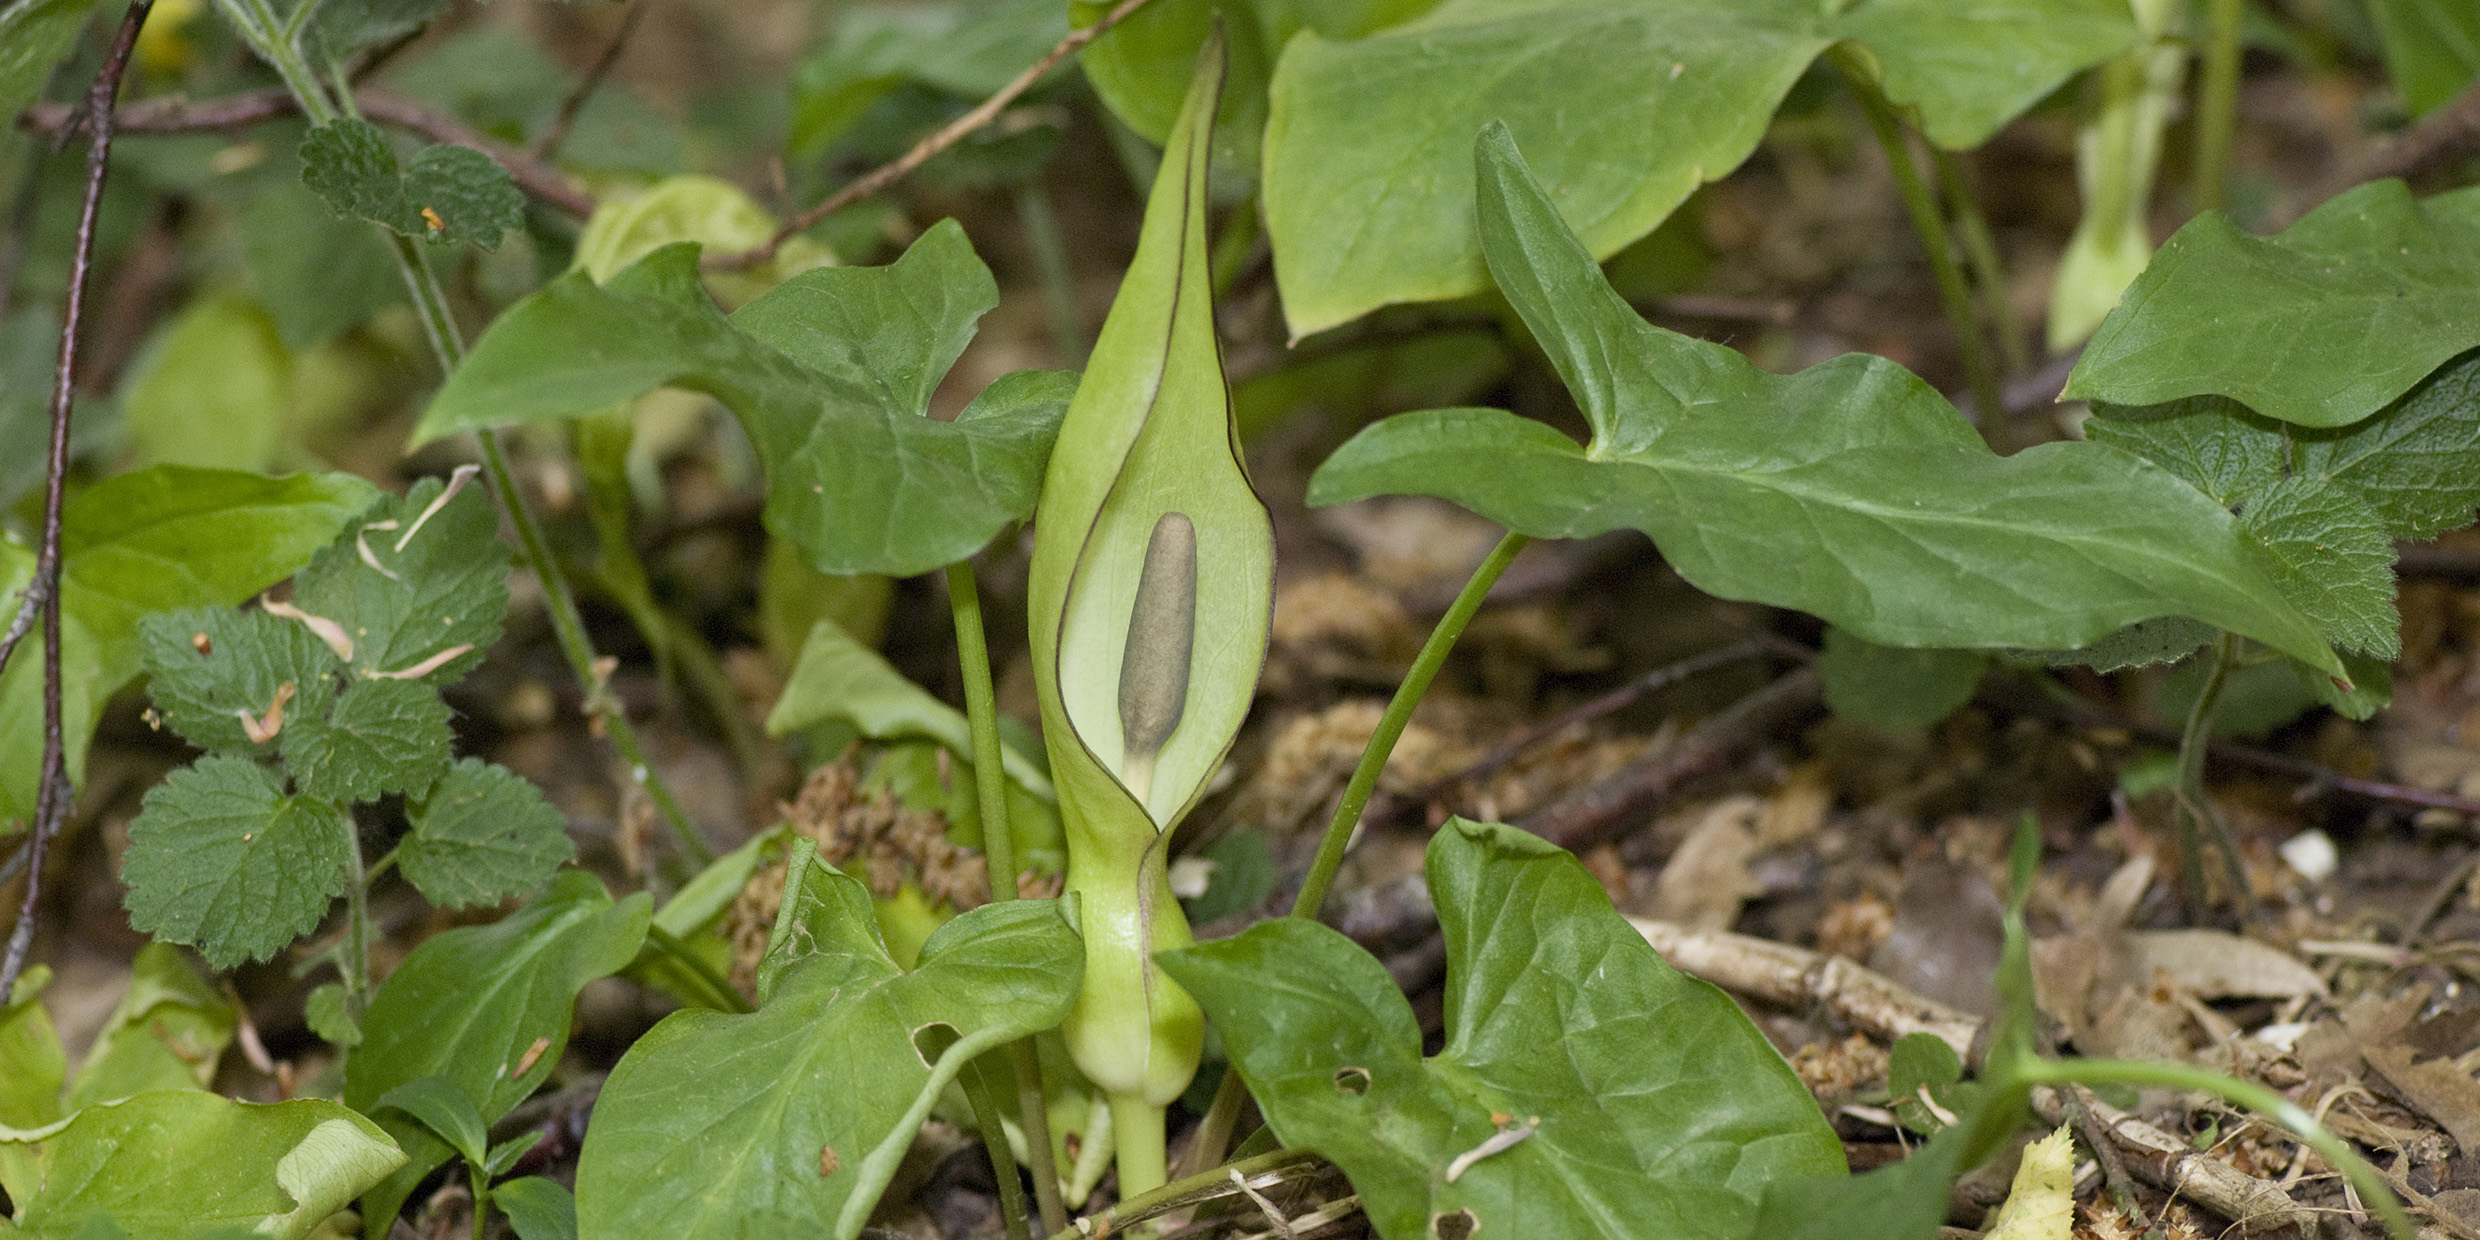 Image of a cuckoo-pint plant